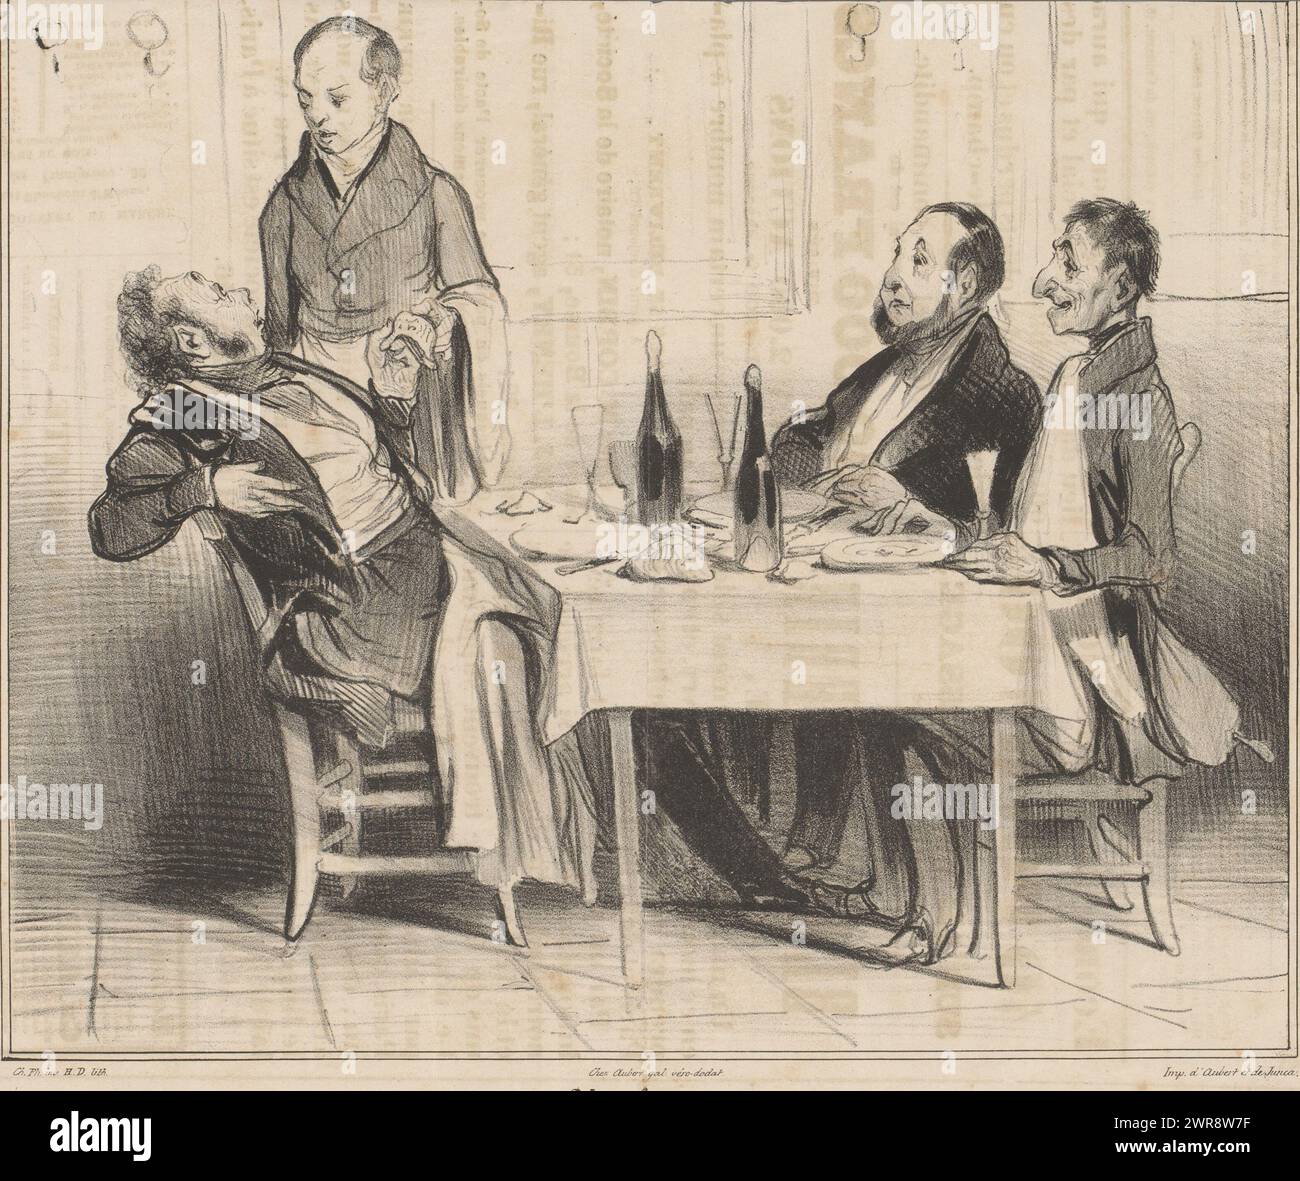 Robert Macaire exchanges words with the waiter in a restaurant, Un bon mari (title on object), Caricatures (series title), Caricaturana (series title), print maker: Honoré Daumier, after design by: Charles Philipon, printer: Aubert & Junca, Paris, 29-Oct-1837, paper, letterpress printing, height 237 mm × width 286 mm, print Stock Photo